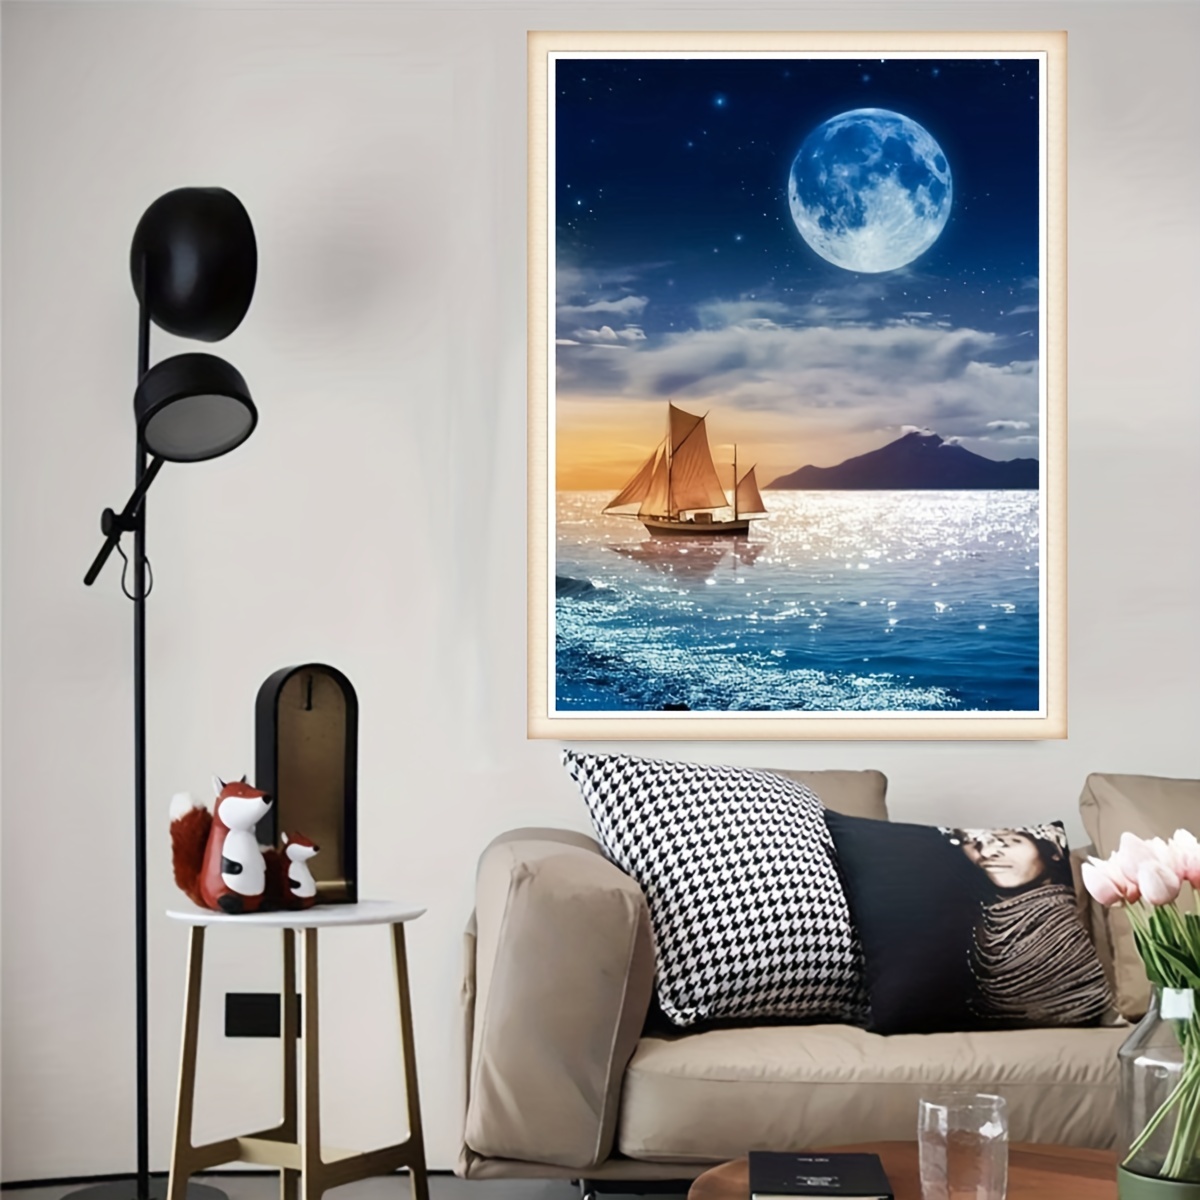 Diy 5d Diamond Painting Kit, Ship On The Sea And Moon Painting Wall Art  Decor, Embroidery Kit Home Room Decor, Handmade Family Gift, Living Room  Kitchen Bedroom Decorative Painting, No Frame 